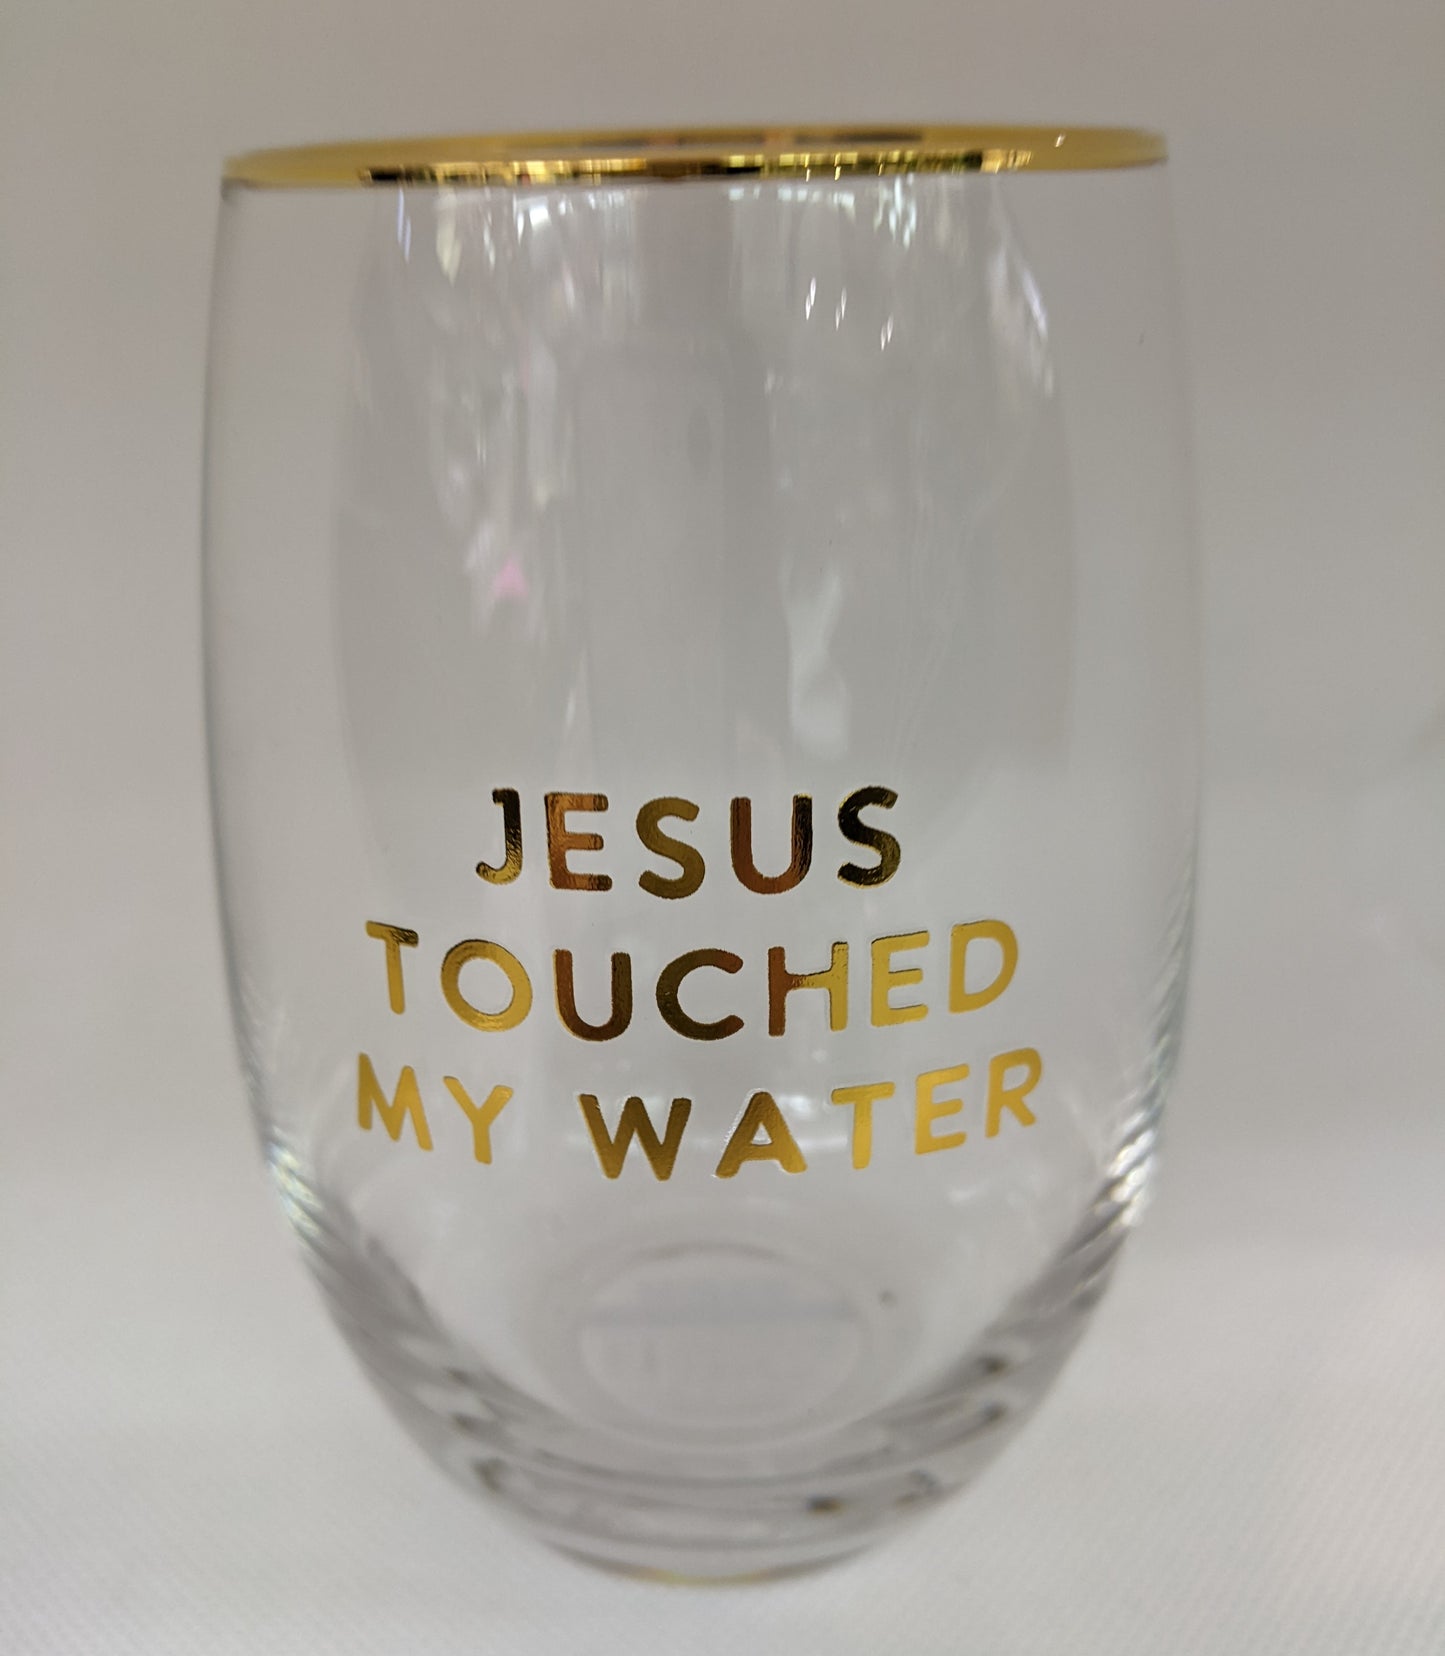 Jesus Touched My Water- wine glass